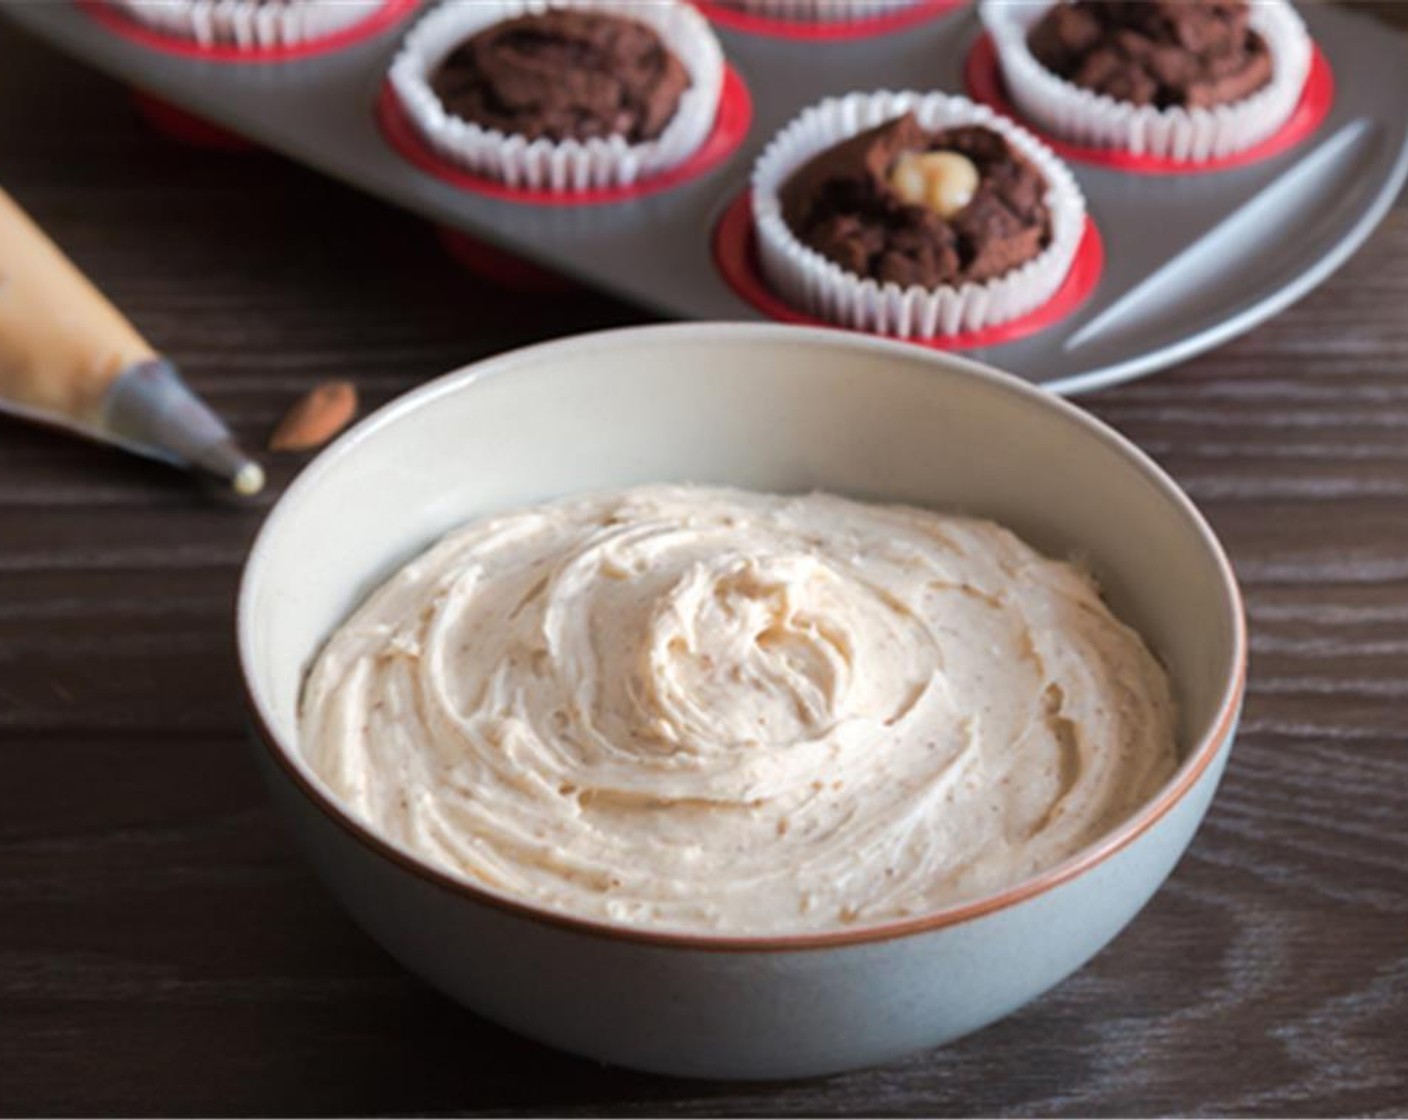 step 6 To make the frosting, use an electric whisk to slowly beat together Unsalted Butter (1 cup), Powdered Confectioners Sugar (4 1/2 cups) and Whole Milk (3 Tbsp) until smooth and fluffy. Then add the Amlou (1/2 cup) and gently combine with the frosting.